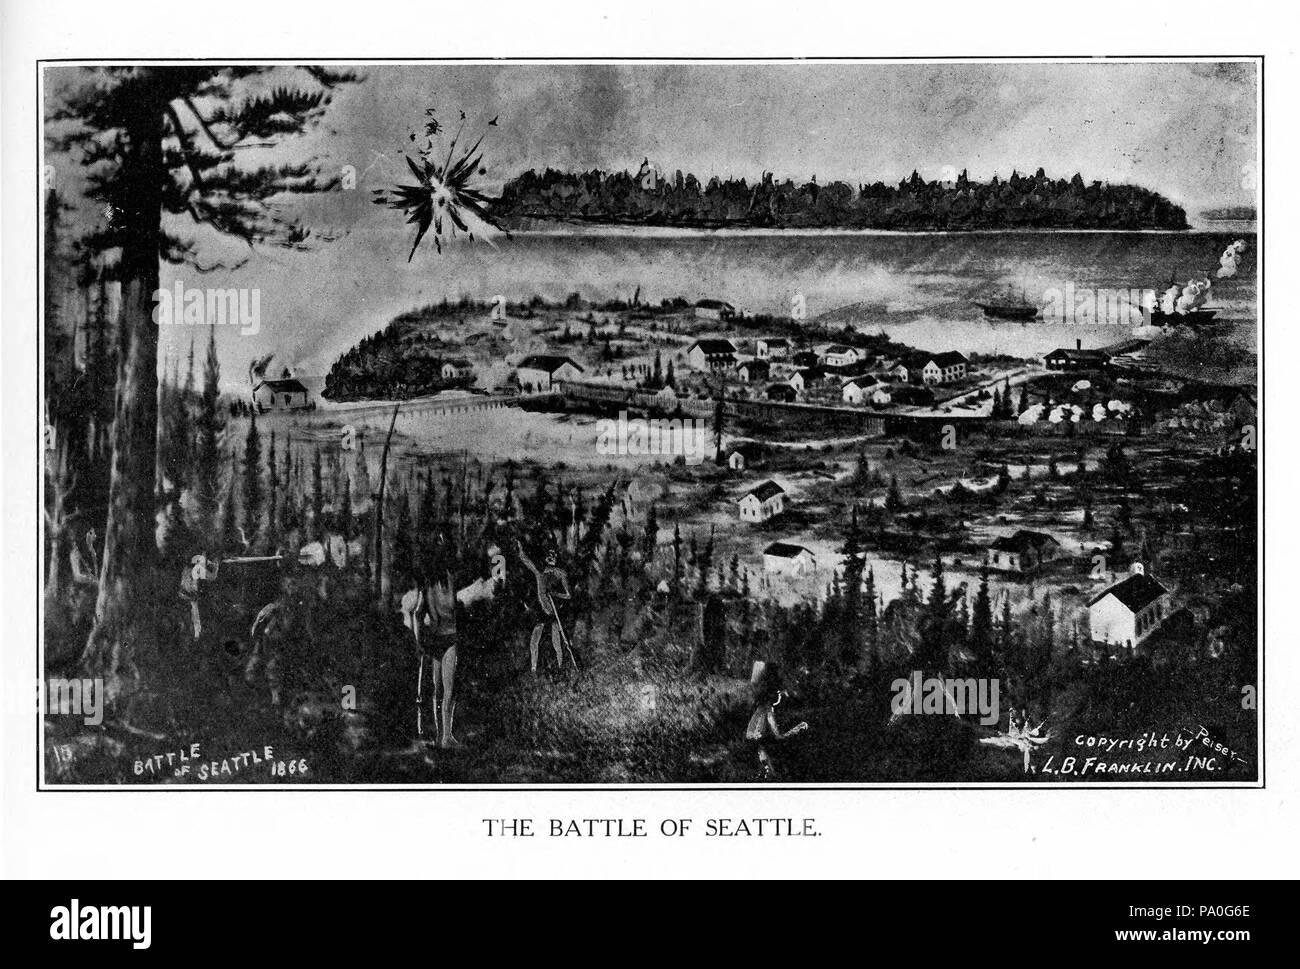 . From the materials for the Alaska-Yukon-Pacific Exposition of 1909, held in Seattle. A drawing of the Battle of Seattle. Despite the '1866' written on the drawing, this should be 1856. 1909 or earlier 697 General history, Alaska Yukon Pacific Exposition, fully illustrated - meet me in Seattle 1909 - Page 70 Stock Photo